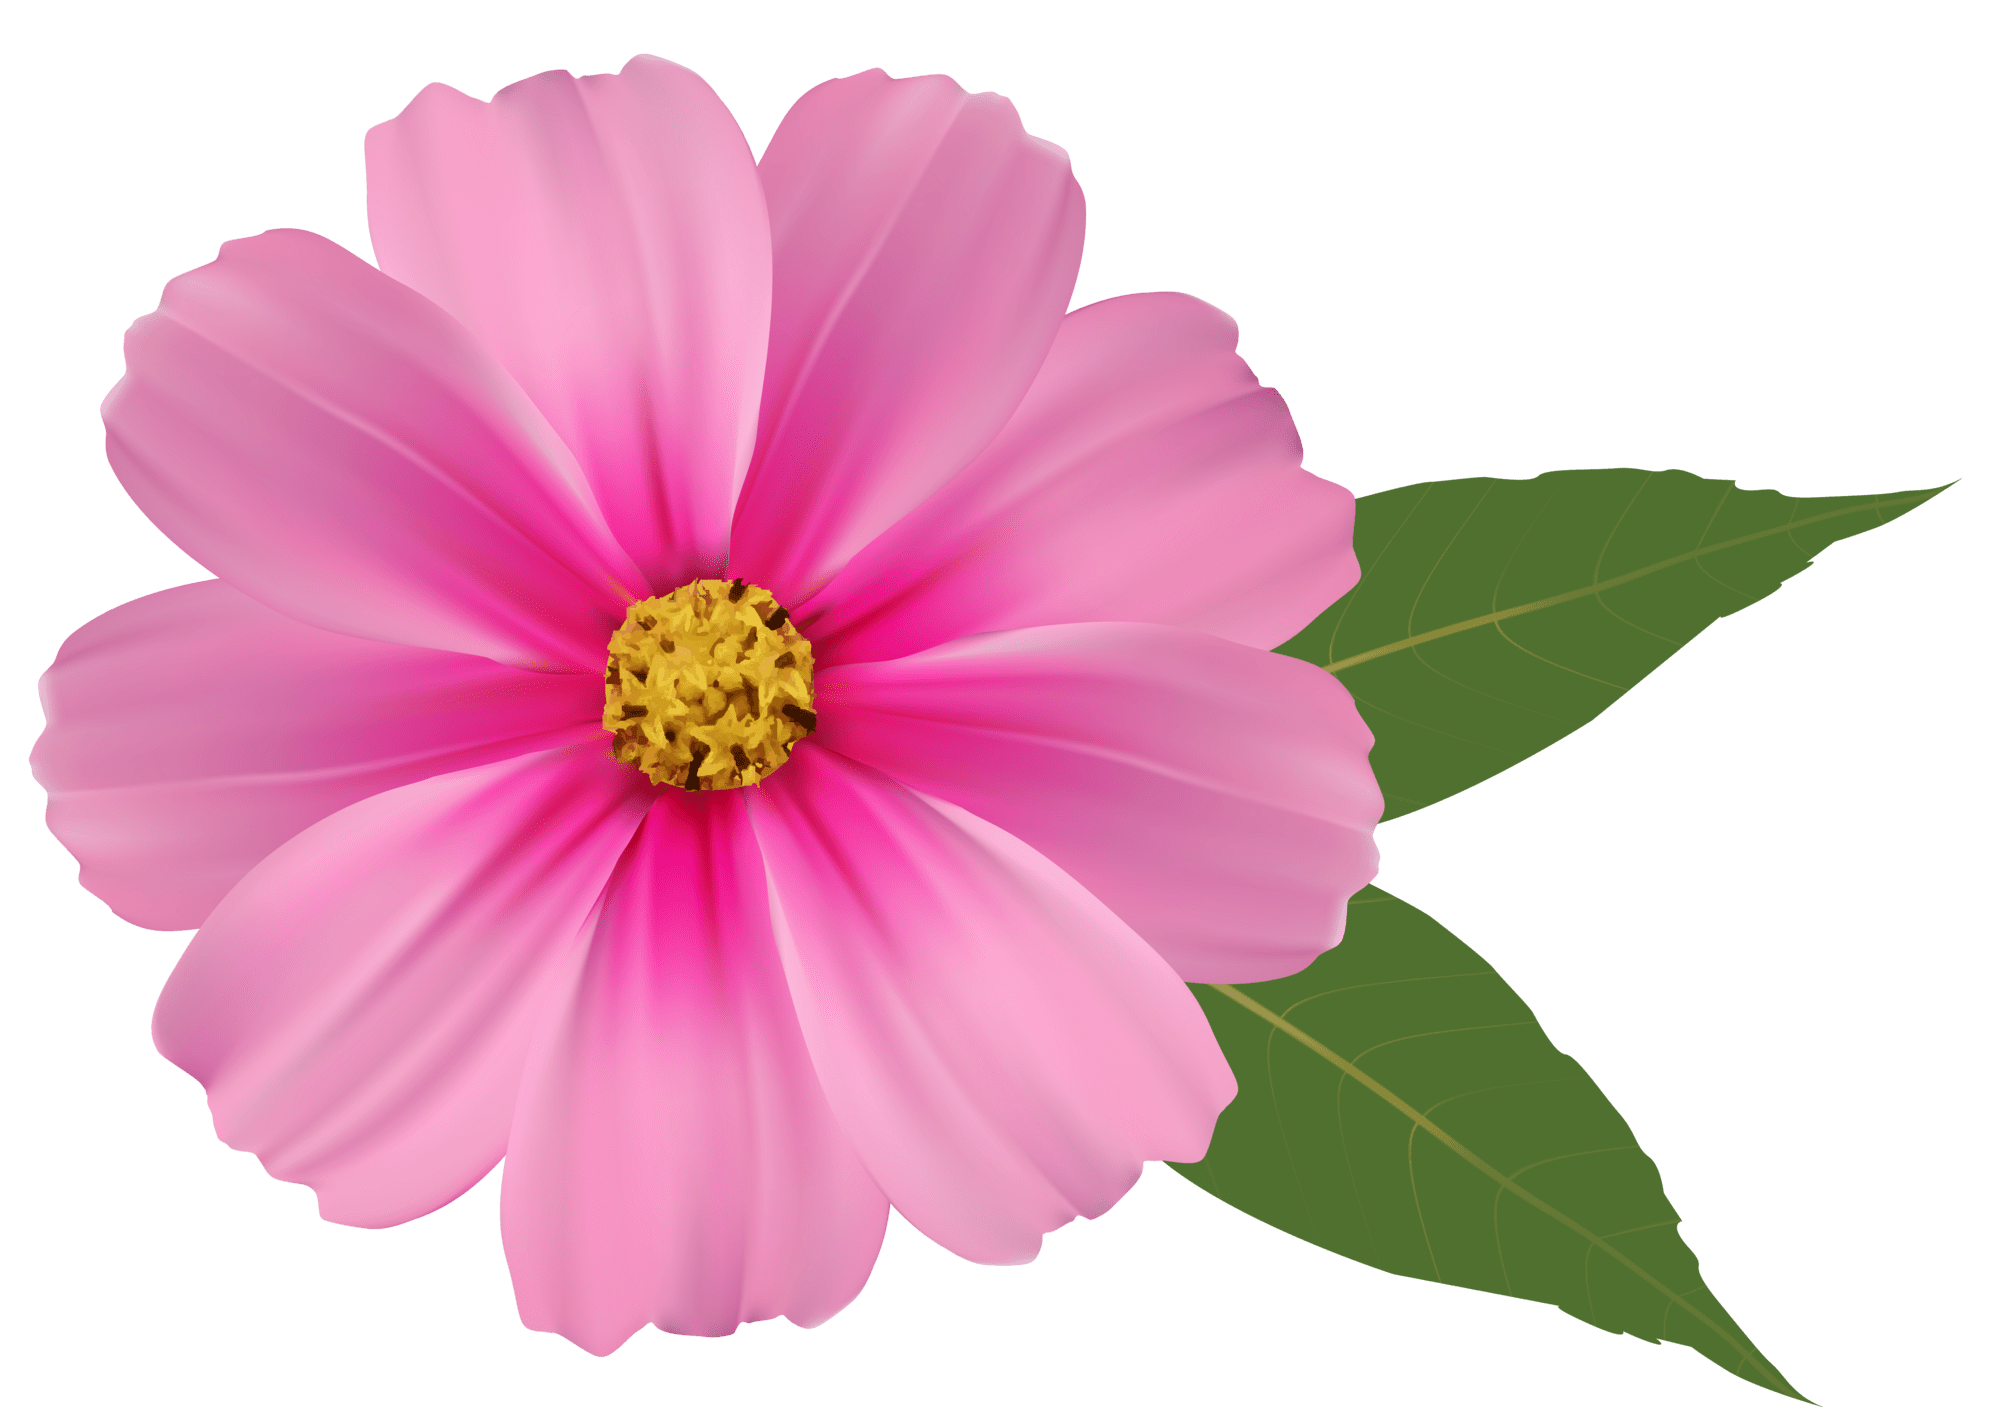 Pink flower image clipart high